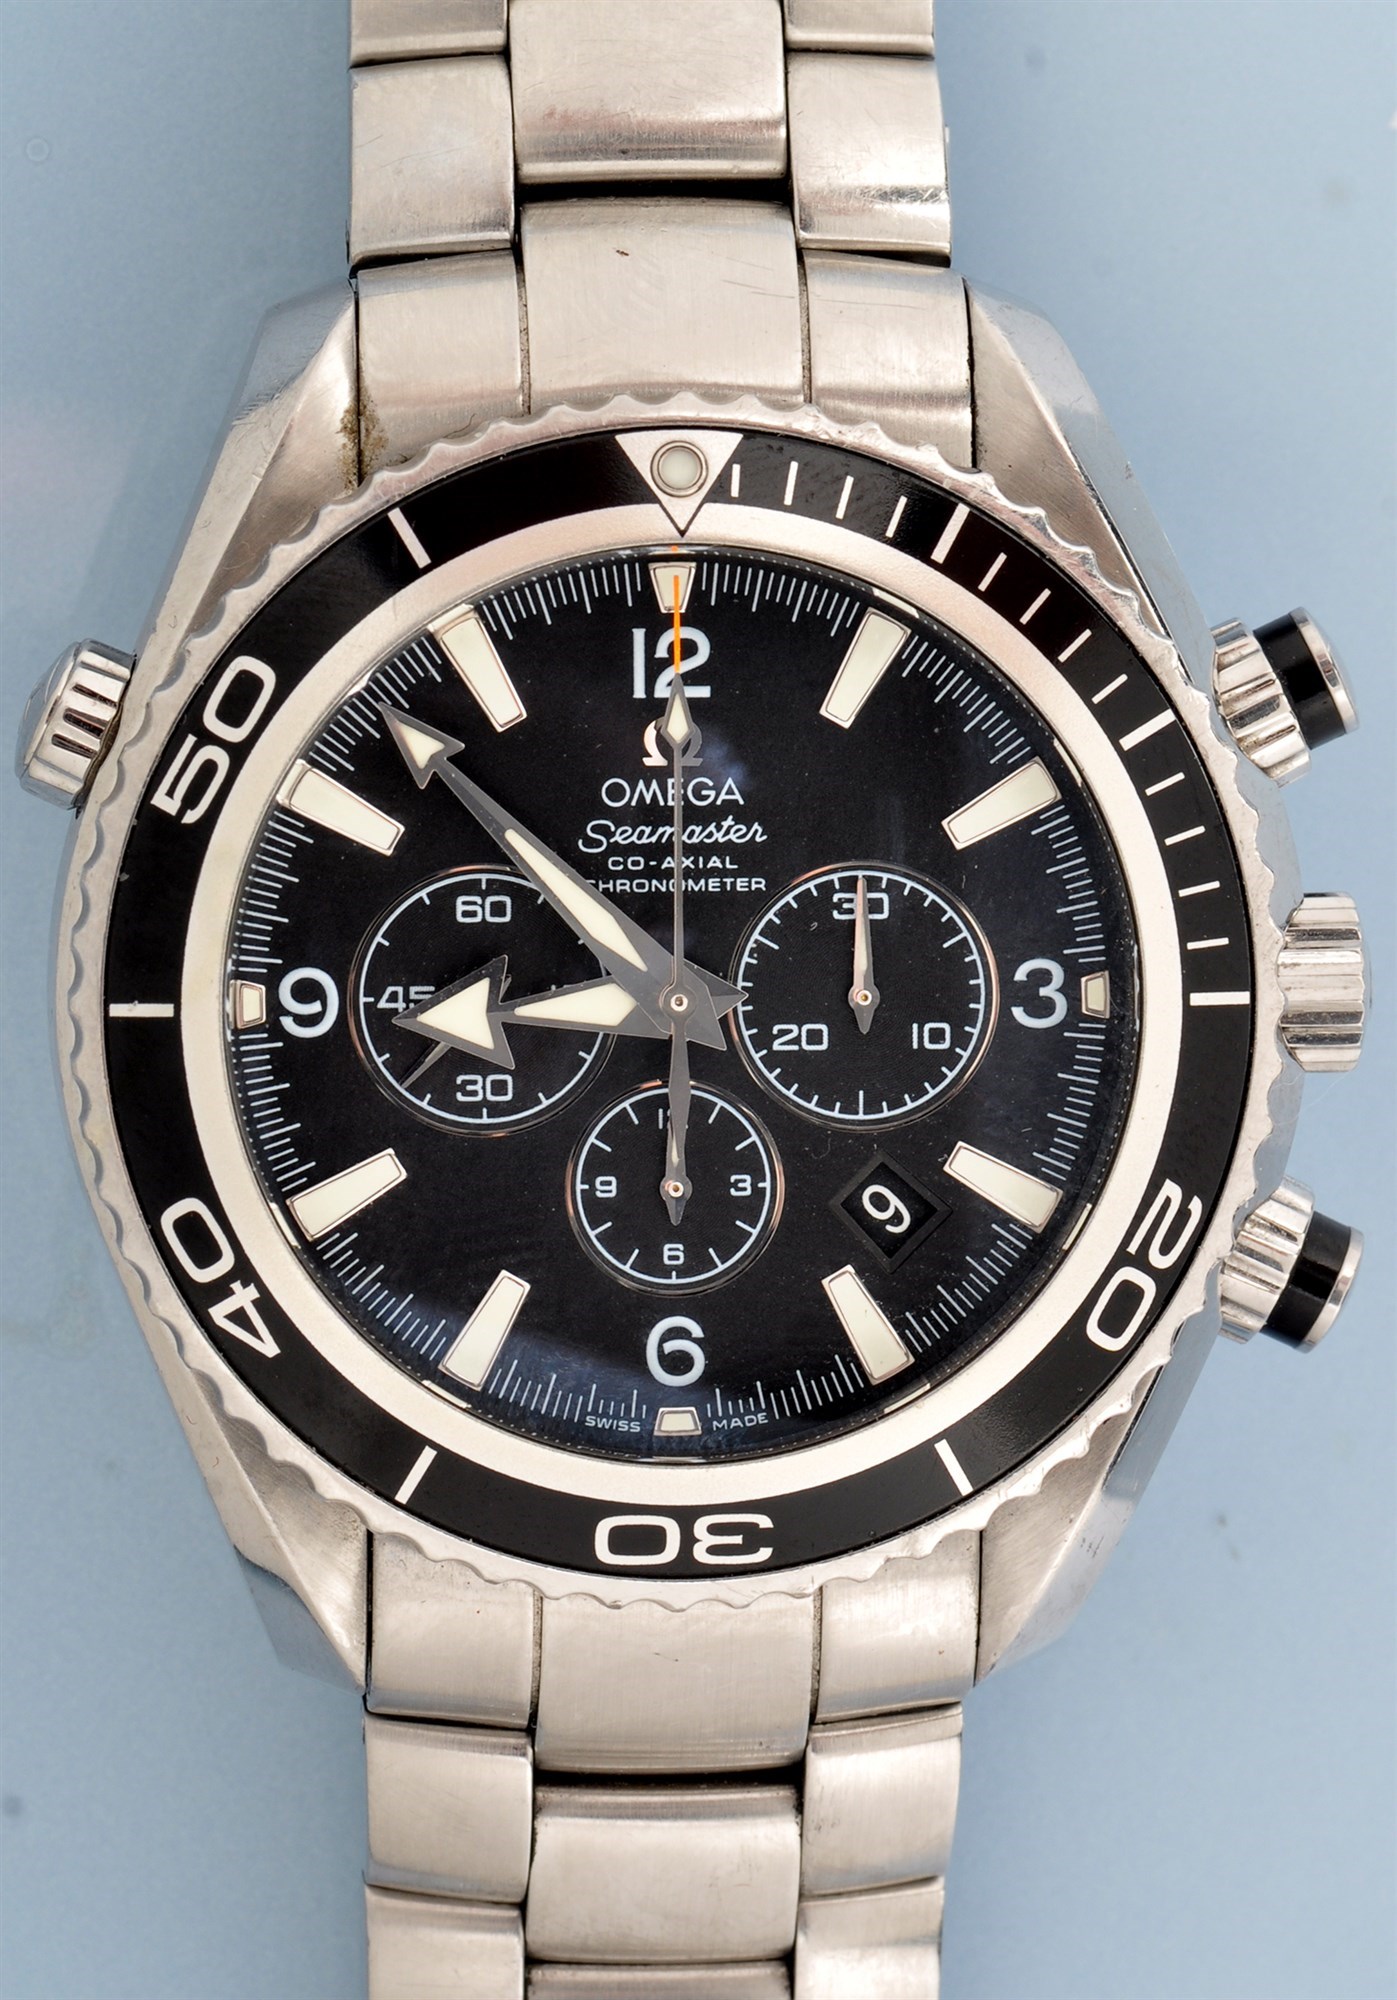 Omega Watch Auctions | Watch Valuations 